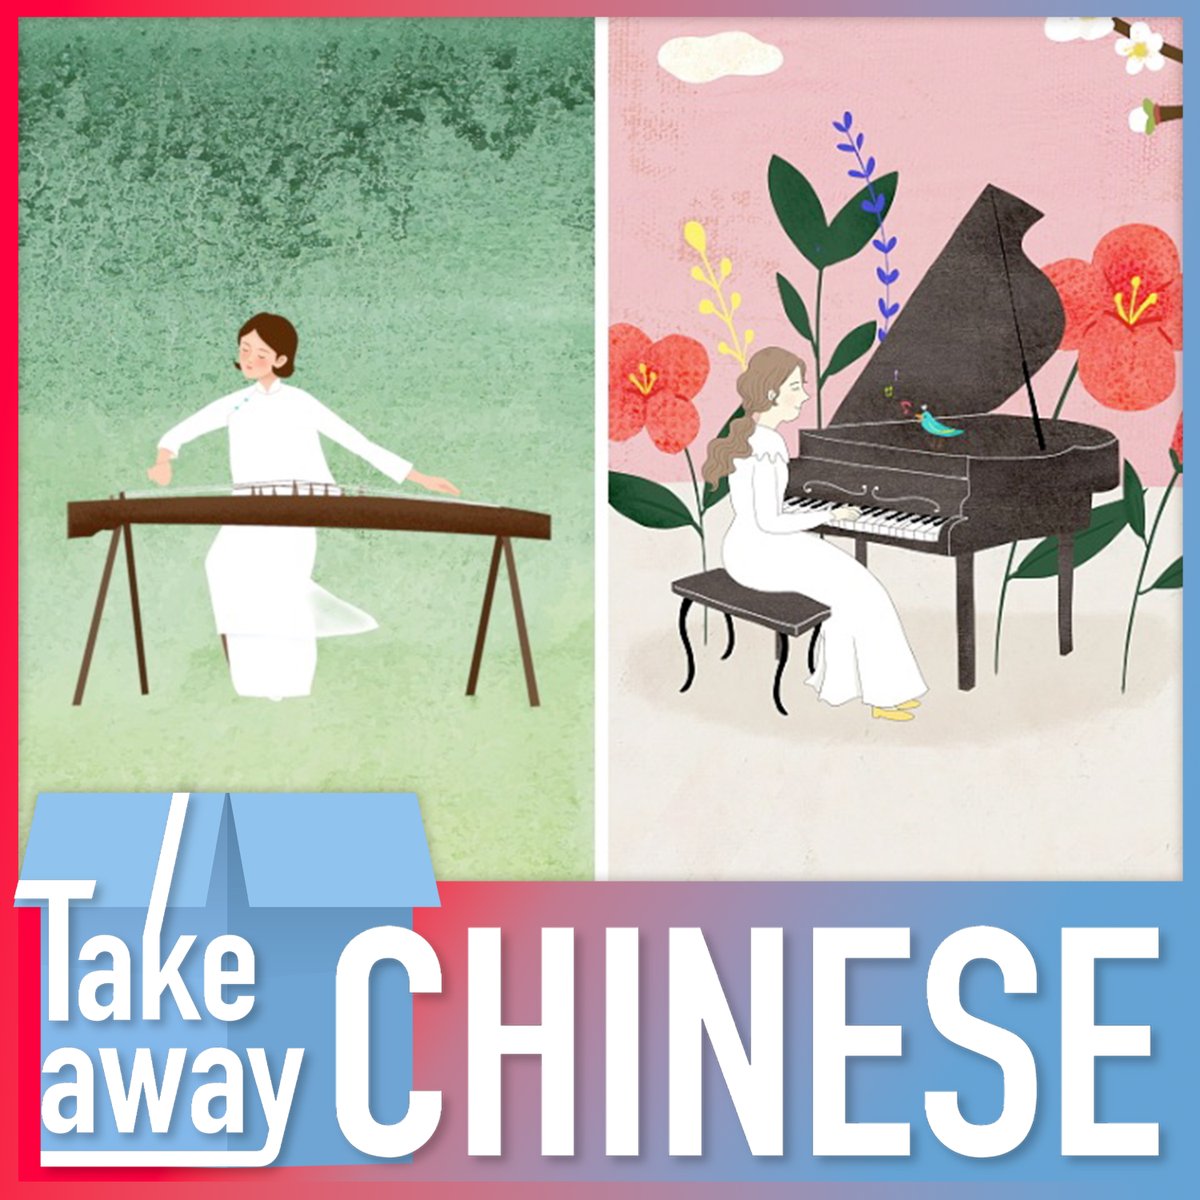 🎵 Are you familiar with any traditional Chinese musical instruments? In this episode of #TakeawayChinese, we explore how they intertwine with their Western counterparts.

🎧 Listen here: open.spotify.com/episode/5eyAcP…